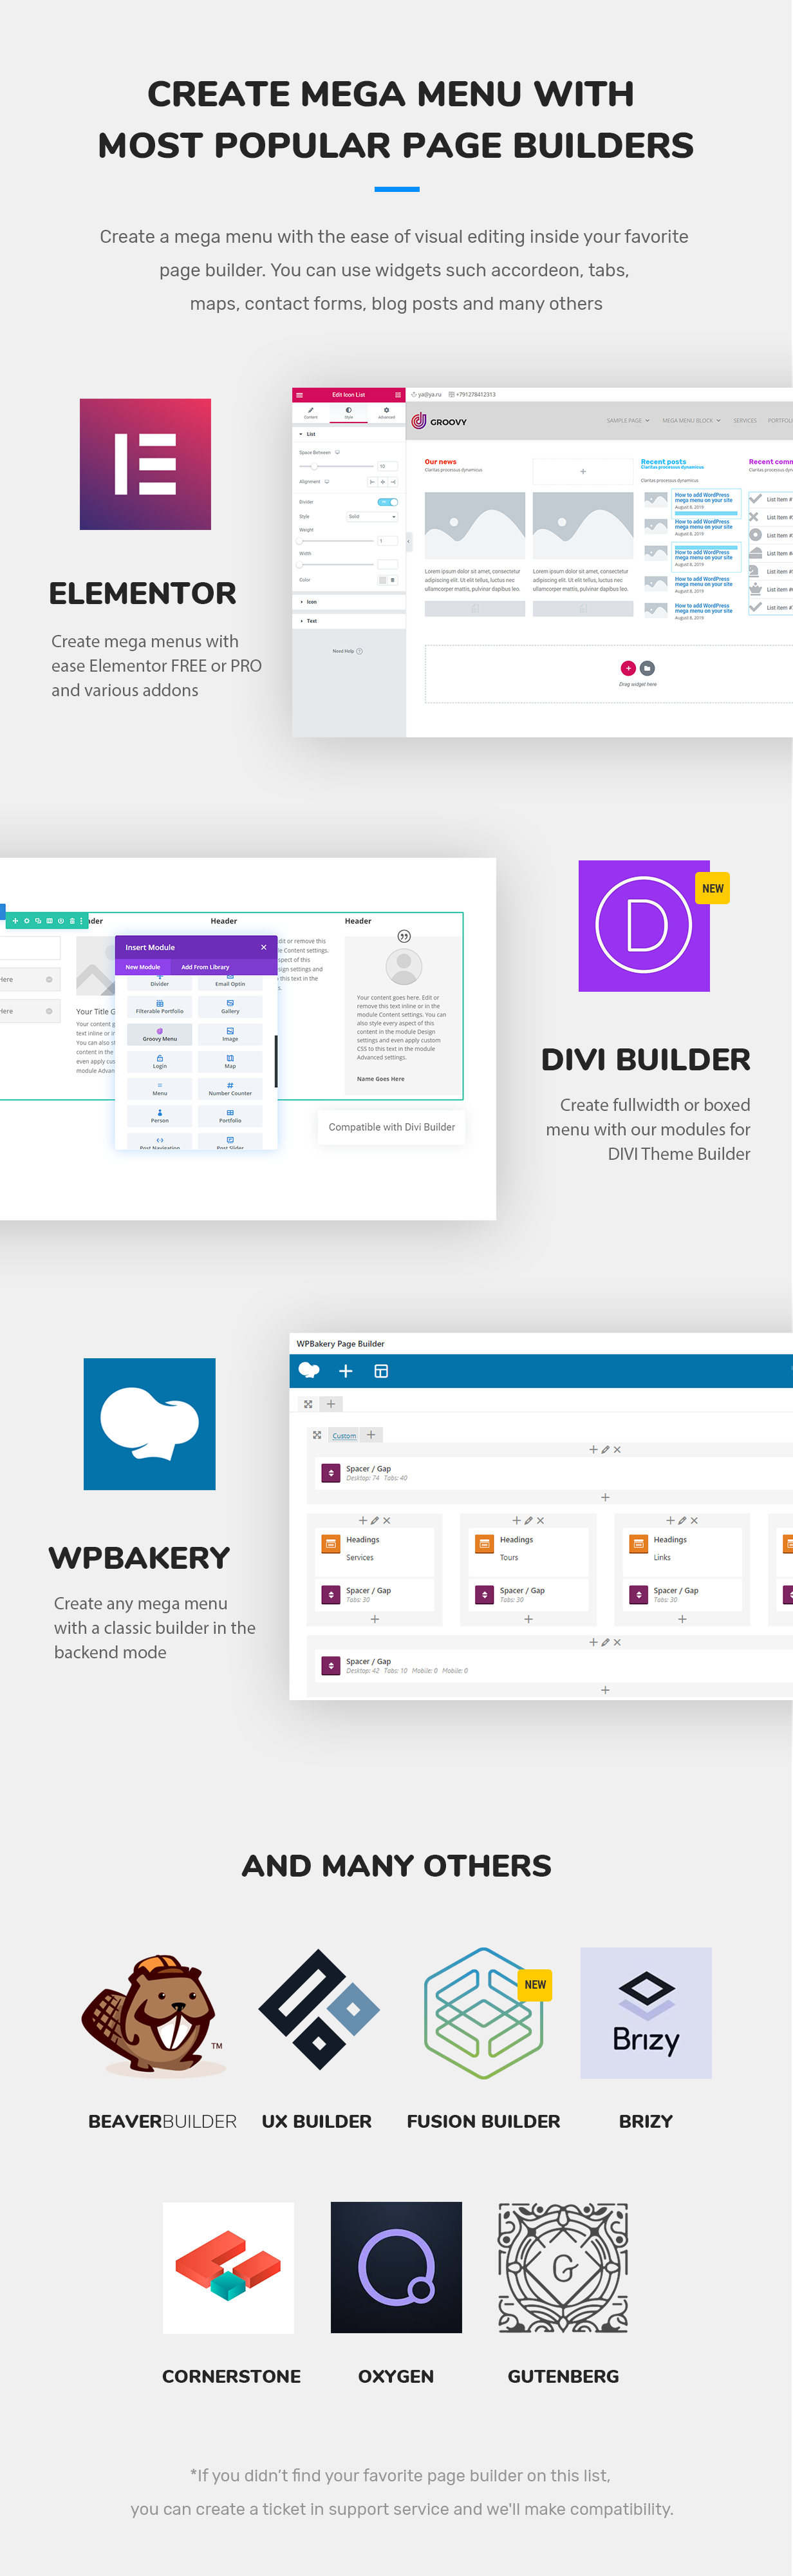 Groovy mega menu compatible page builders is a DIVI theme, Elementor Free and PRO, WPBakery, Brizy, Oxygen, Theme Fusion, Gutenberg, Beaver Builder, UX Builder by Flatsome, Cornerstone 